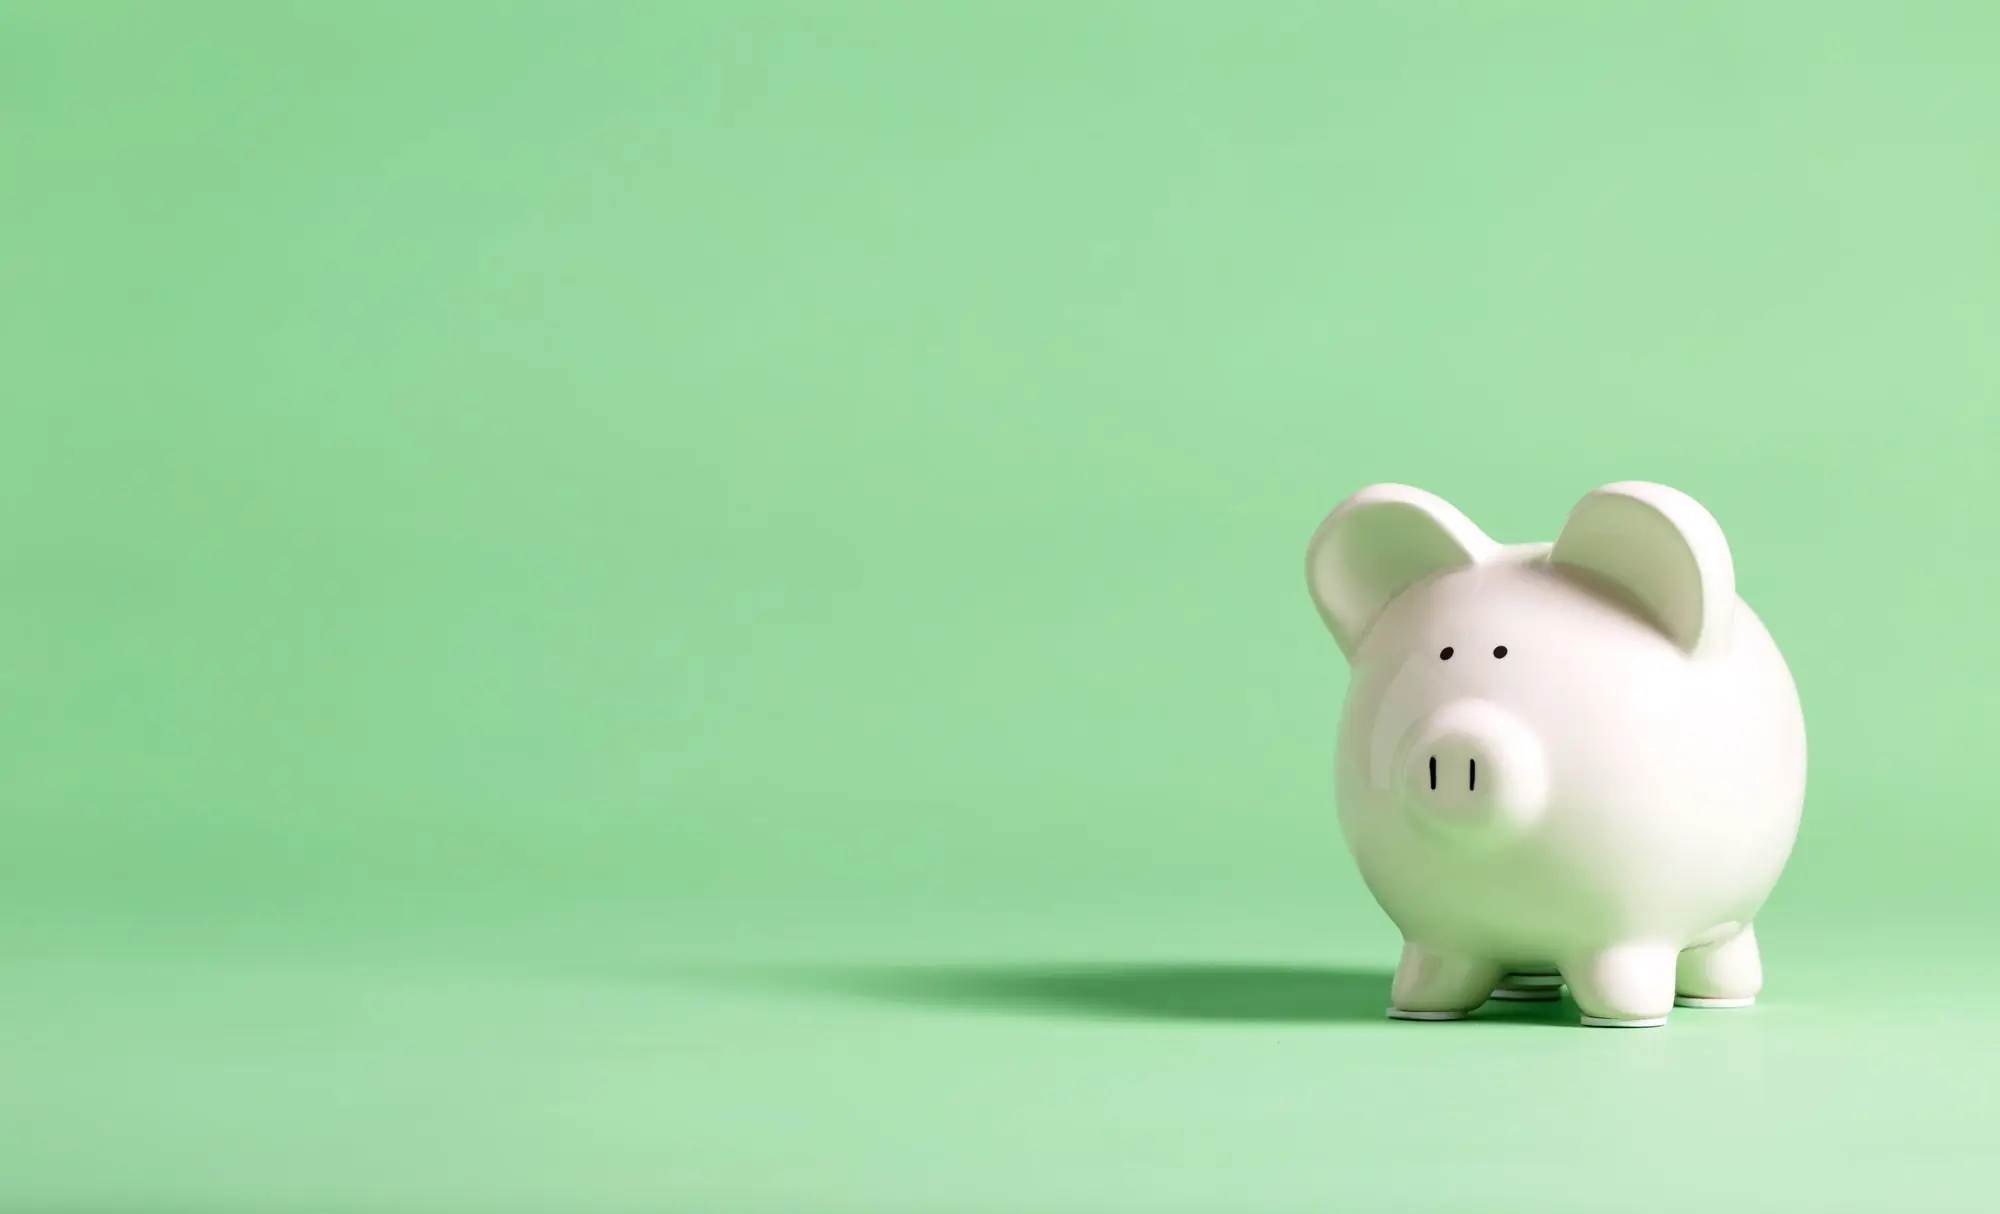 White piggy bank against a green background. 